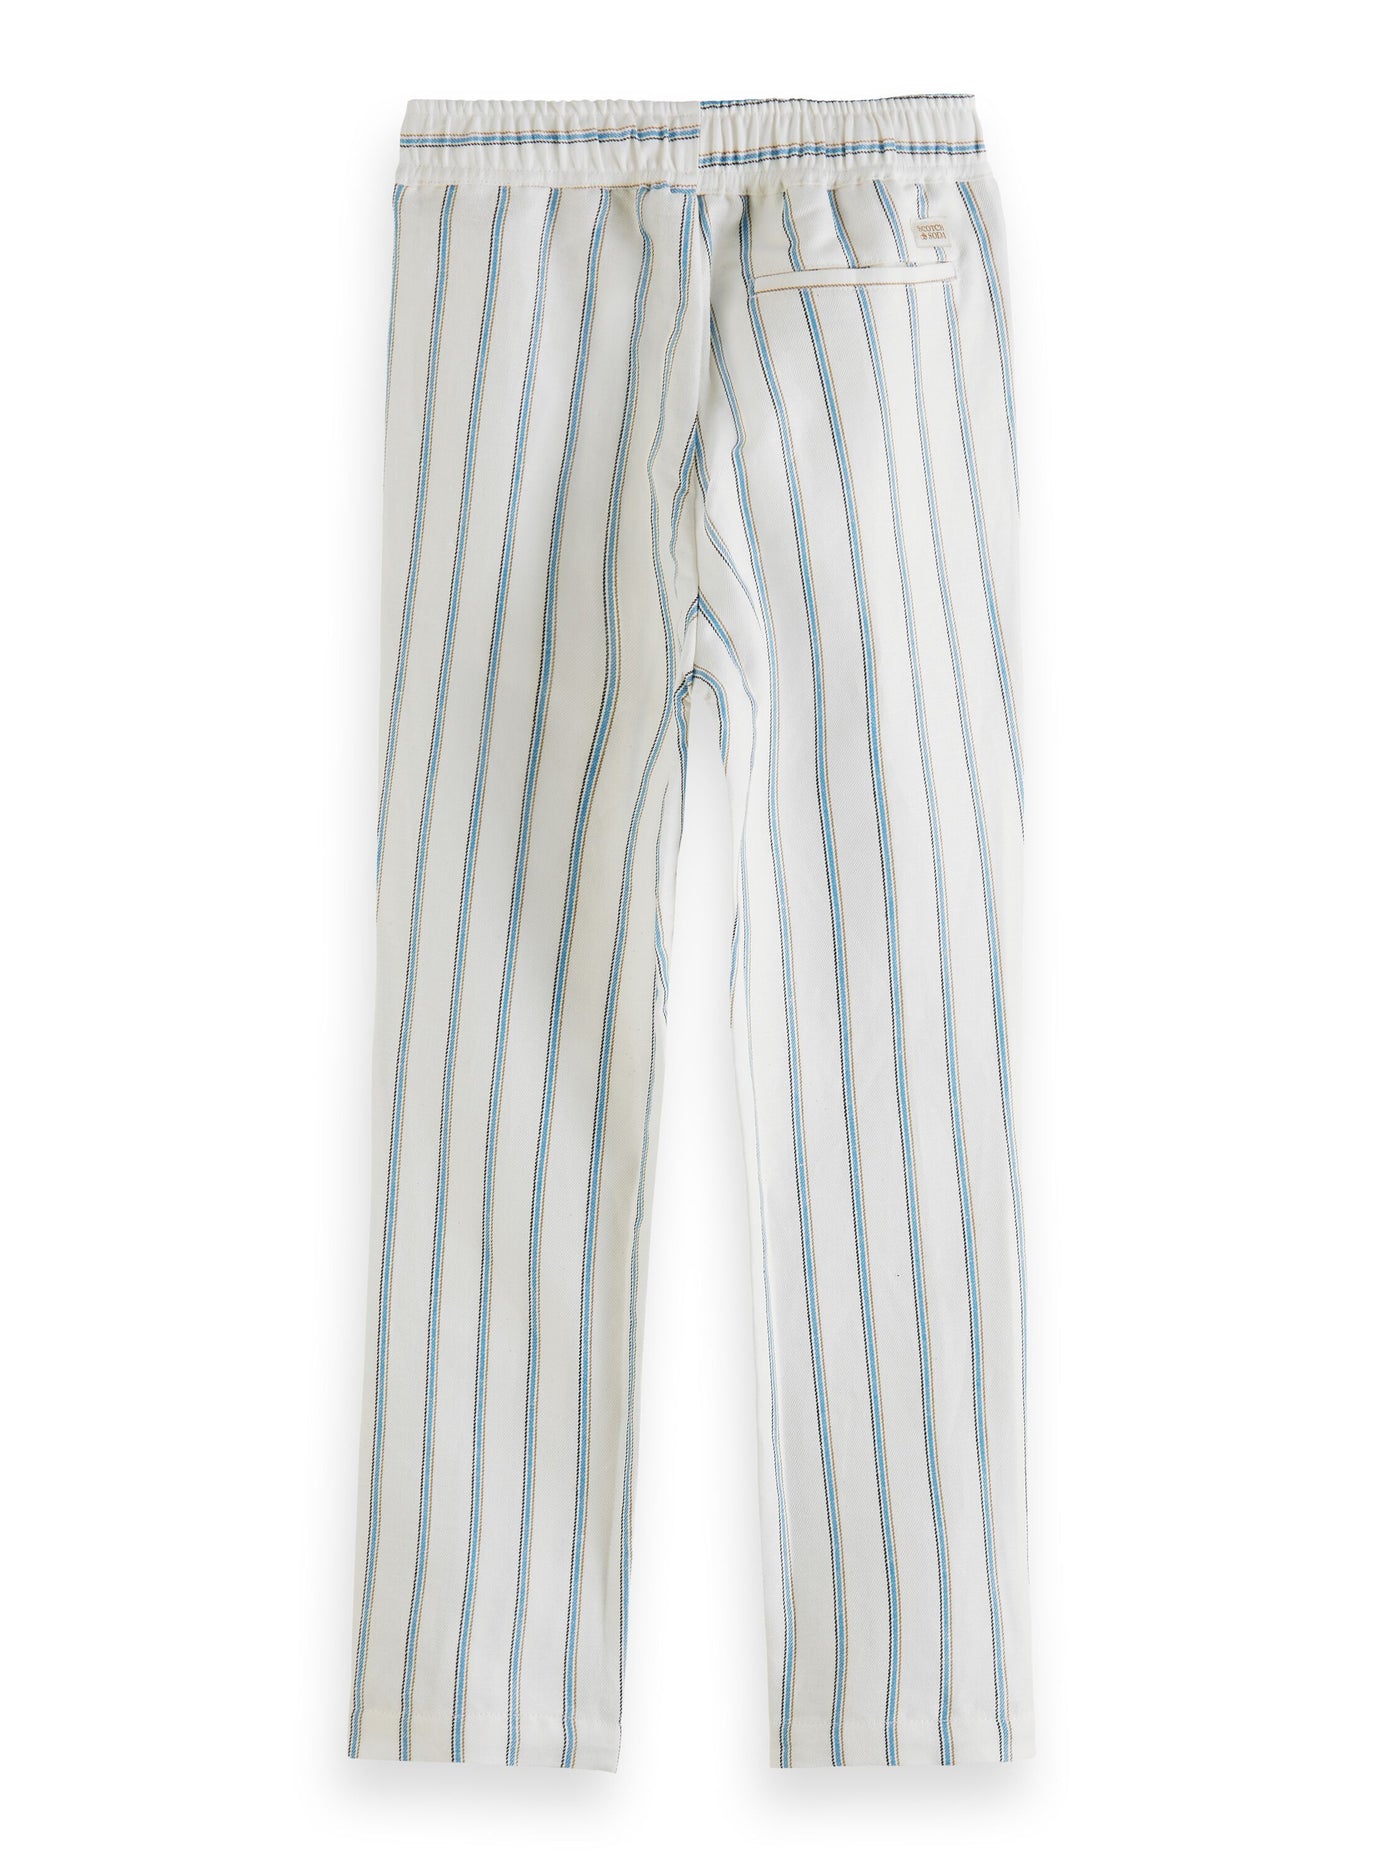 Relaxed Slim Fit Linen Pants